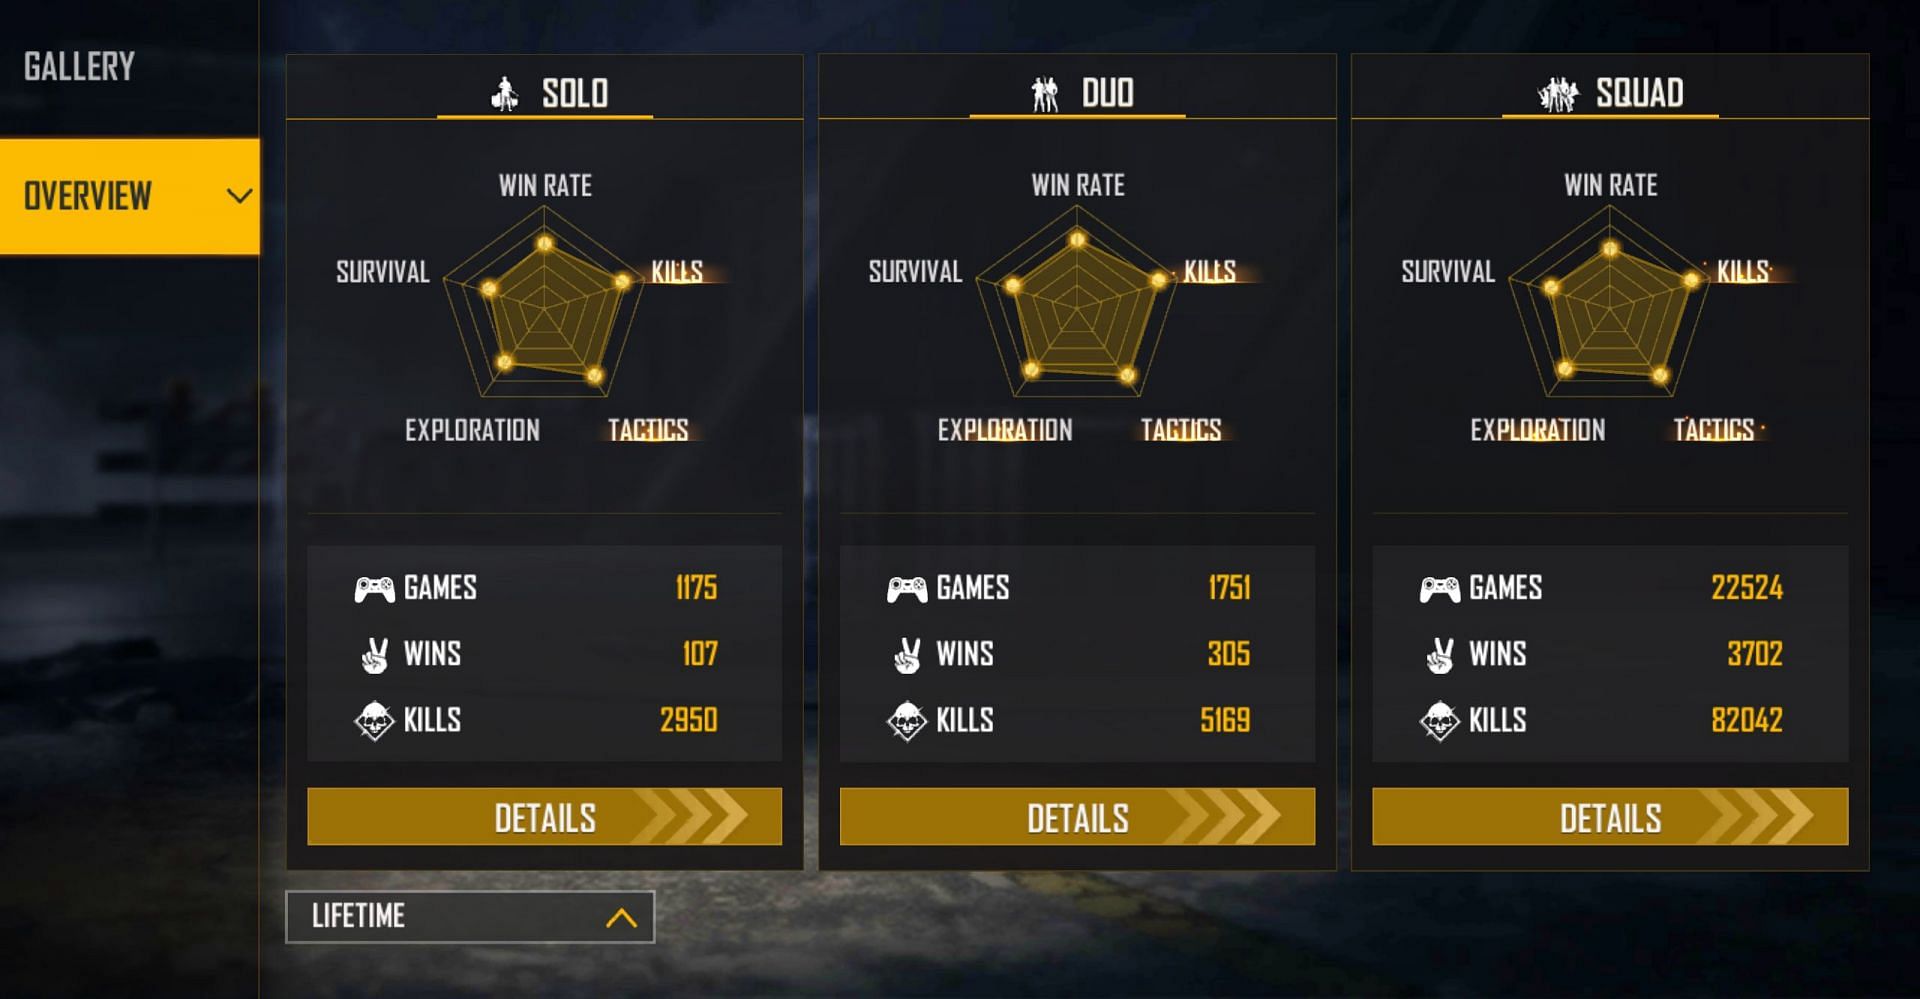 Vincenzo has over 82k frags in squad games (Image via Free Fire)